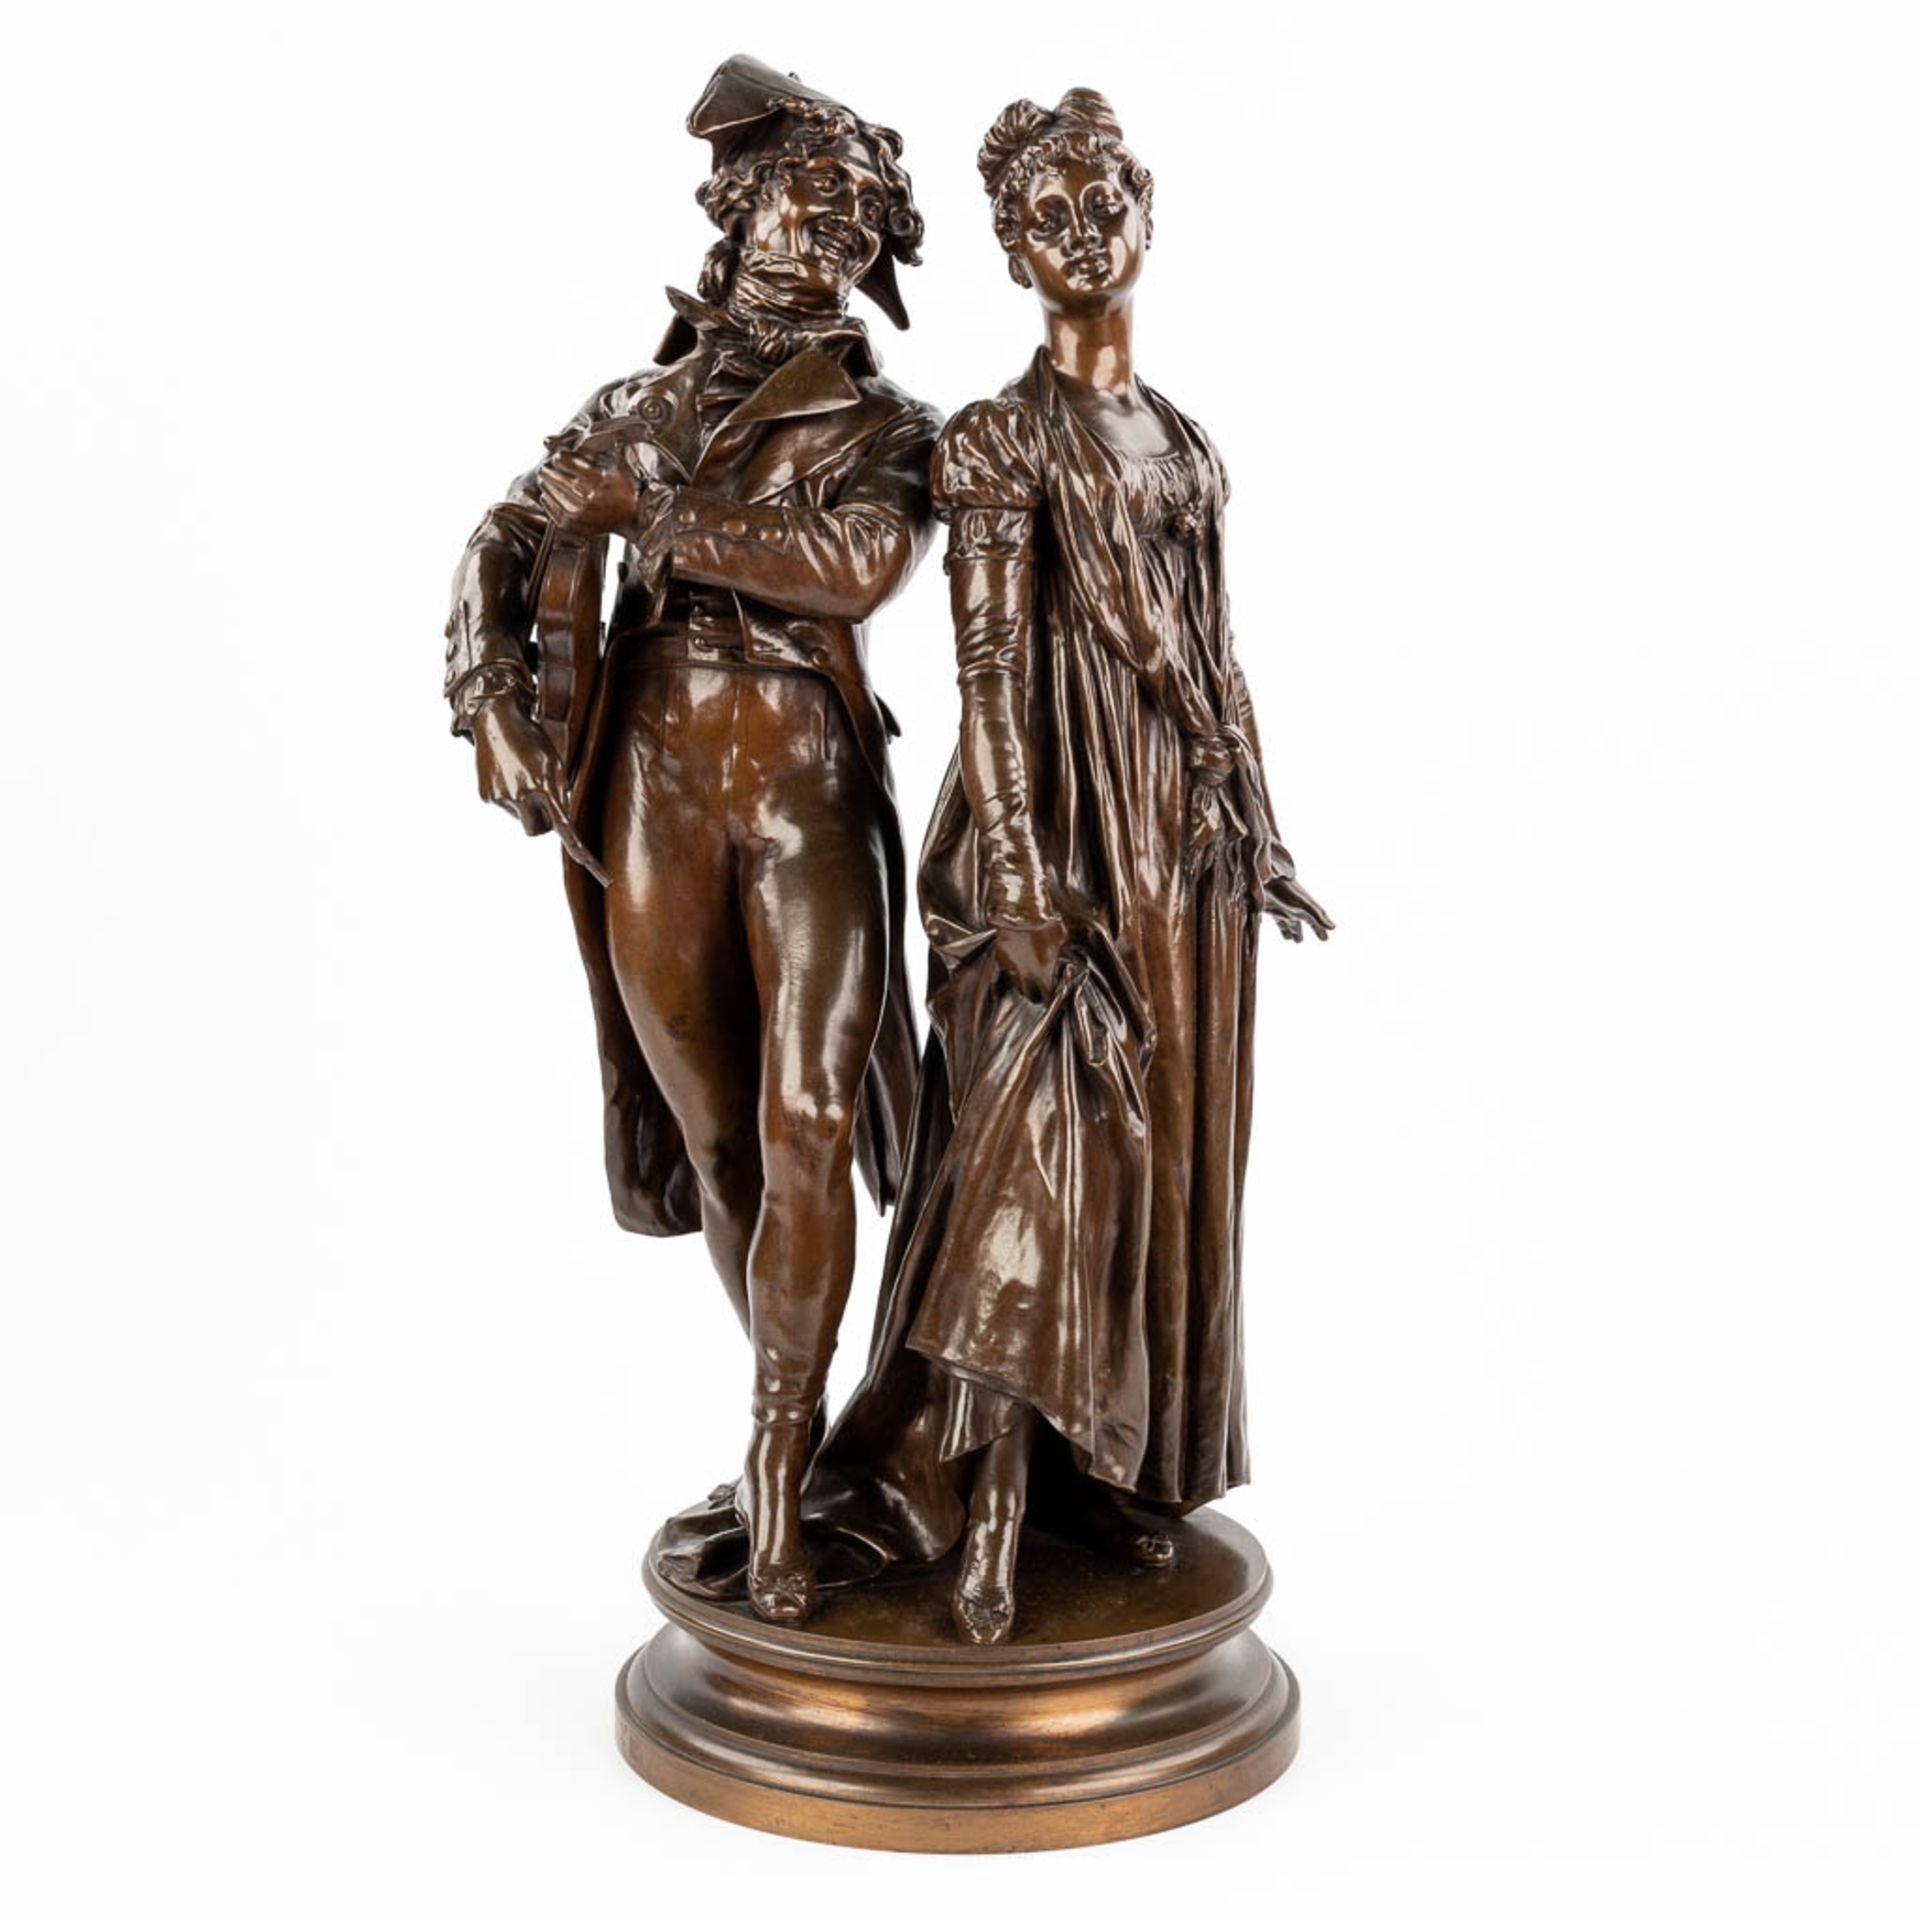 Henry ƒtienne DUMAIGE (1830-1888) 'Nobleman and his wife' patinated bronze (63 x 26cm)